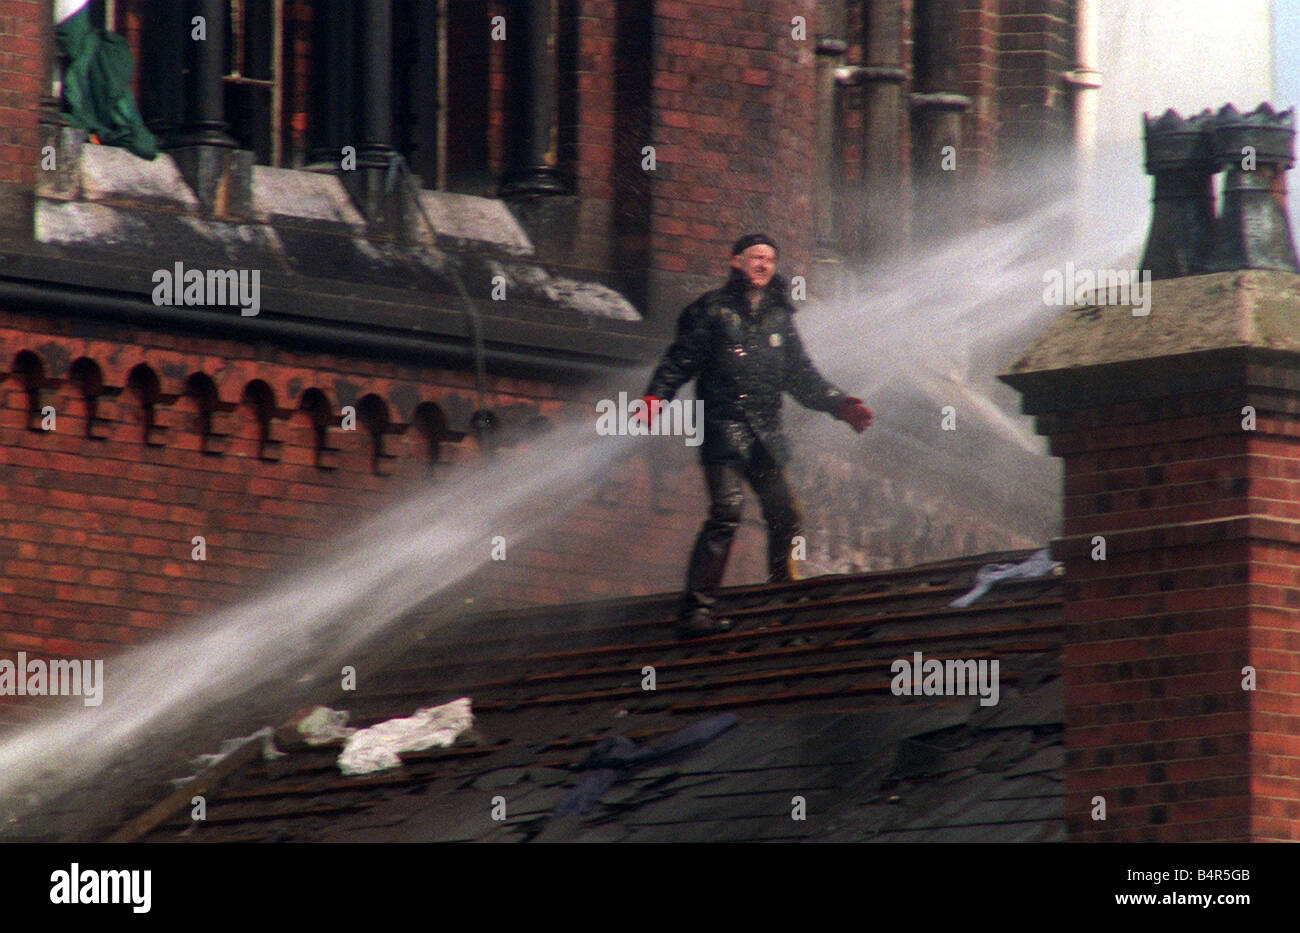 Strangeways Prison Riots 1990 prisoners on the roof demonstrating Rooftop protest by prisoners at Strangeways Prison 1990 in Machester The slates have been stripped from the roof and thrown to the ground below Stock Photo